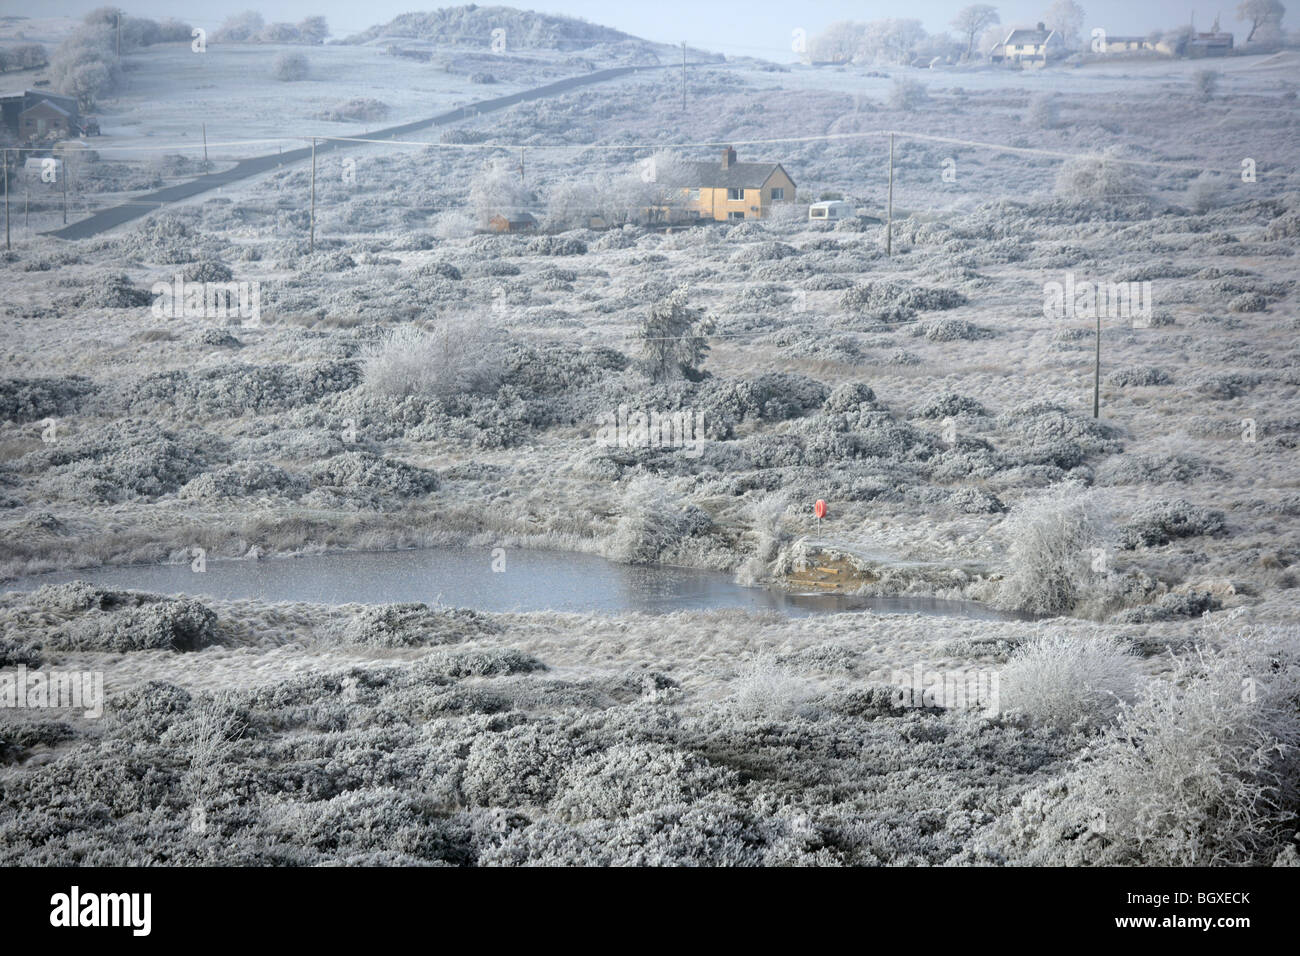 A frozen landscape with remote homes on Halkyn mountain near Rhosesmor north Wales. Stock Photo